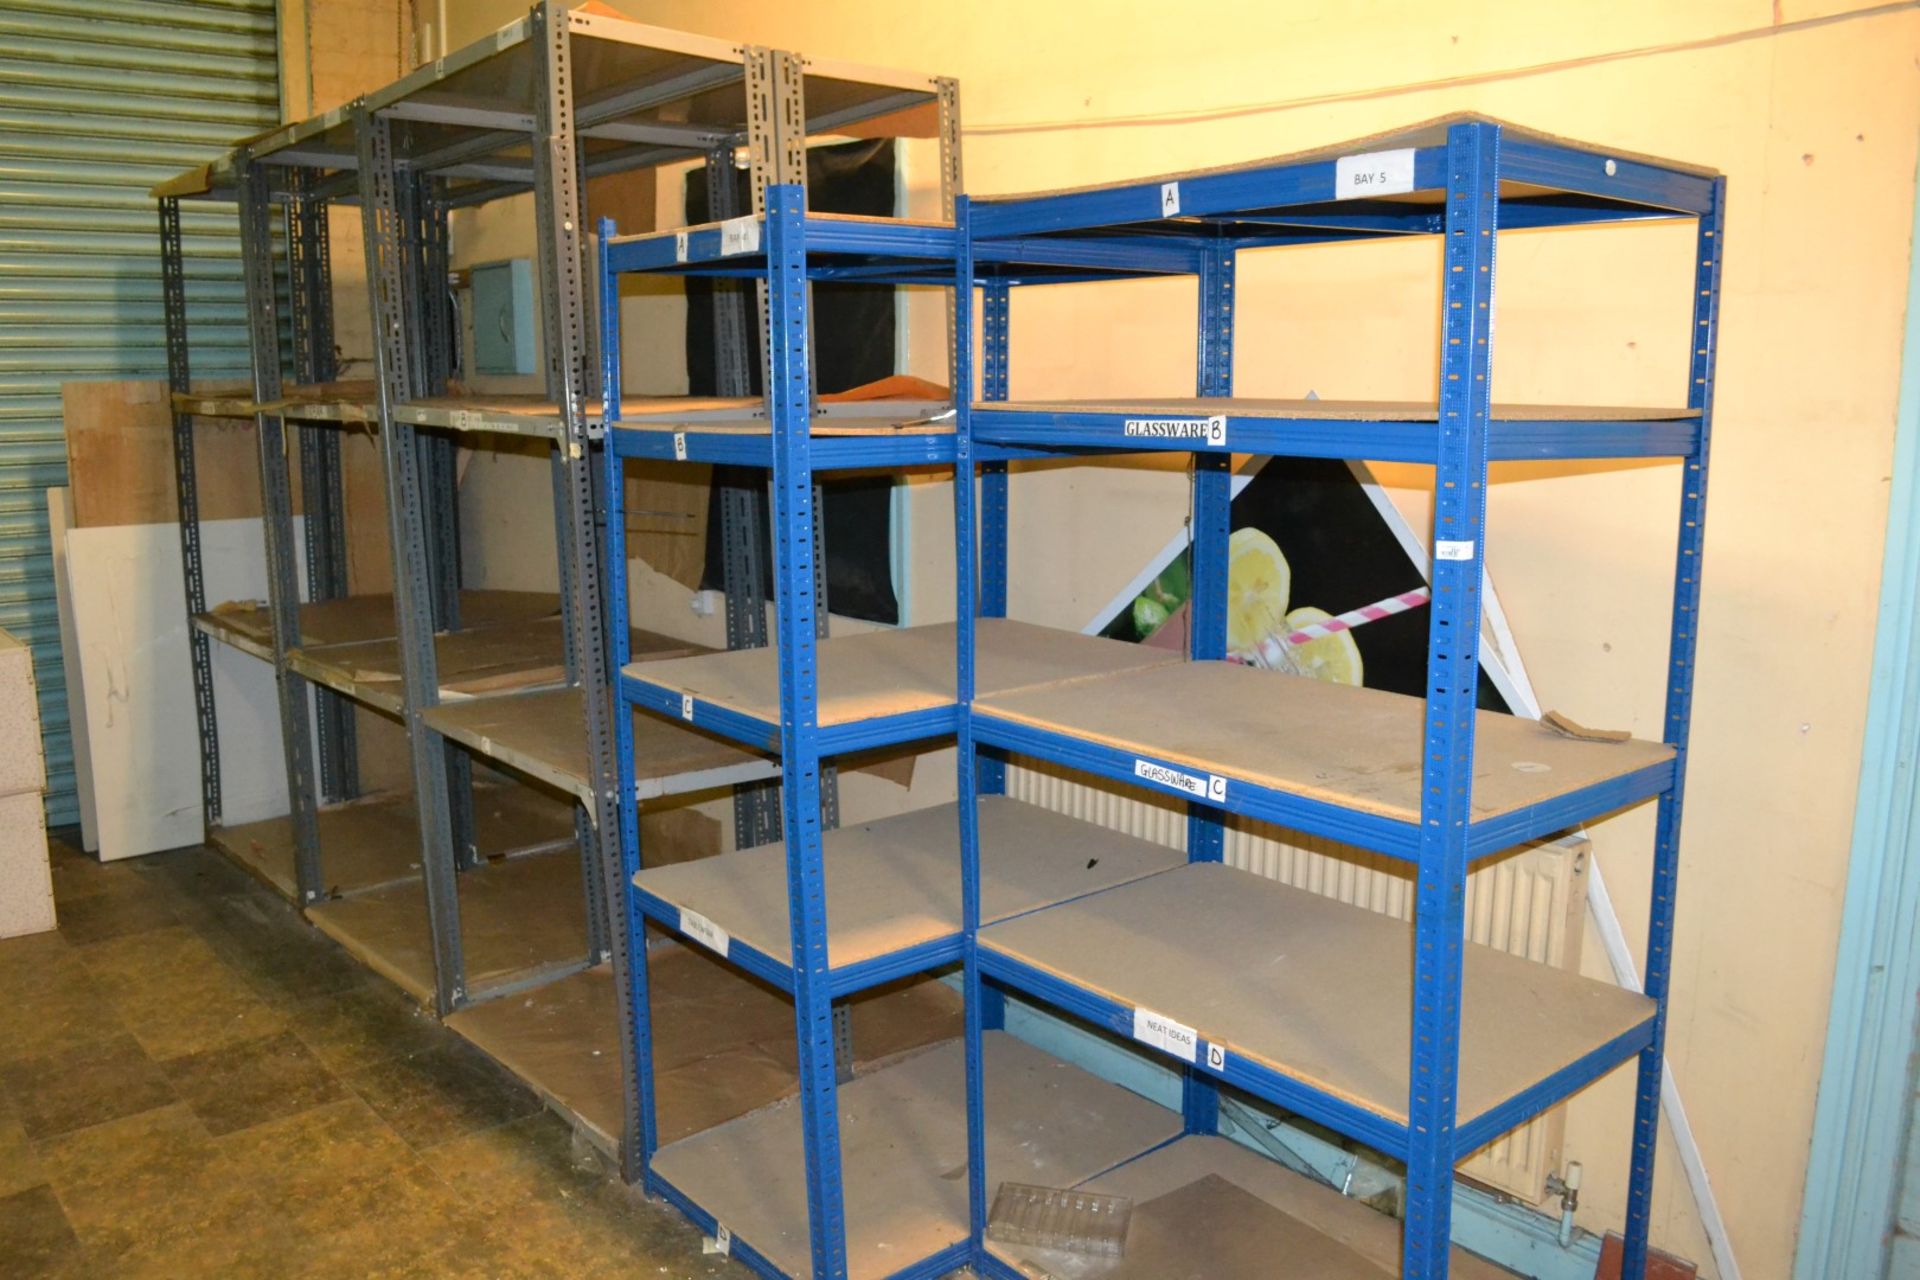 9 x Various Pieces of Steel Shelving - Various Sizes Included - BB GF PTP - CL351 - Location: - Image 2 of 6